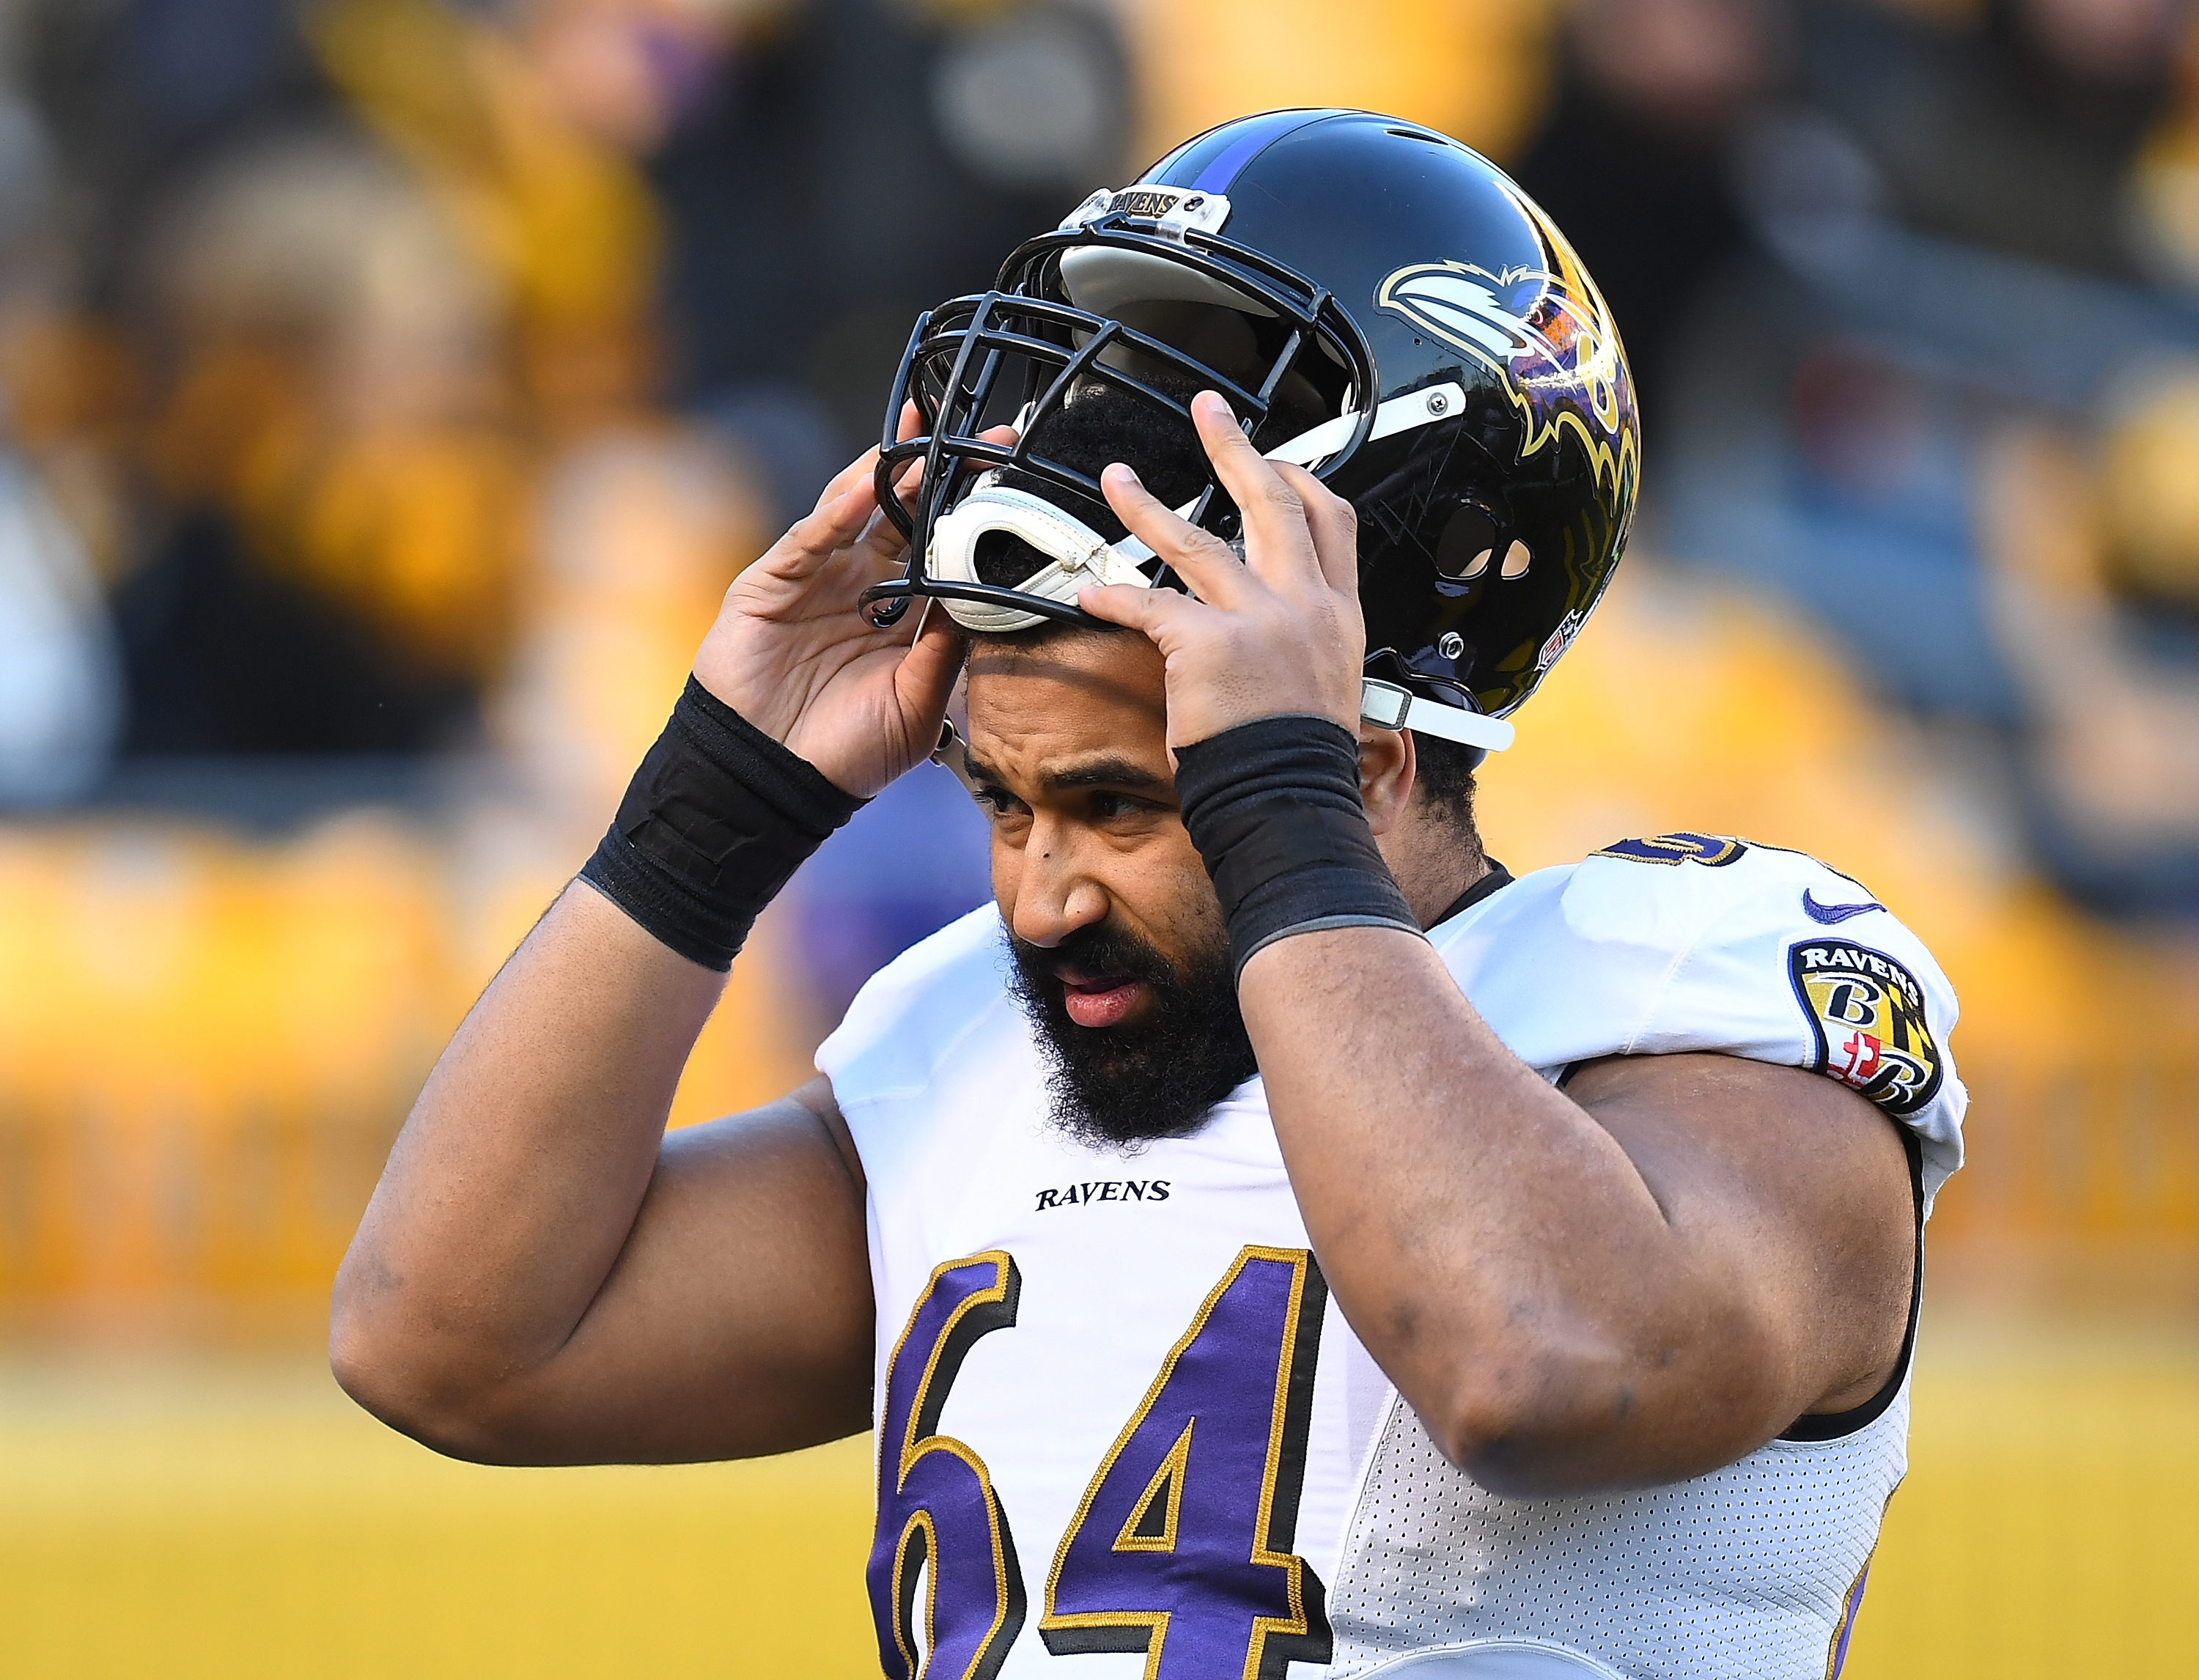 John Urschel of the Baltimore Ravens looks on during the game against the Pittsburgh Steelers at Heinz Field on December 25, 2016 in Pittsburgh, Pennsylvania. (Joe Sargent&mdash;Getty Images)